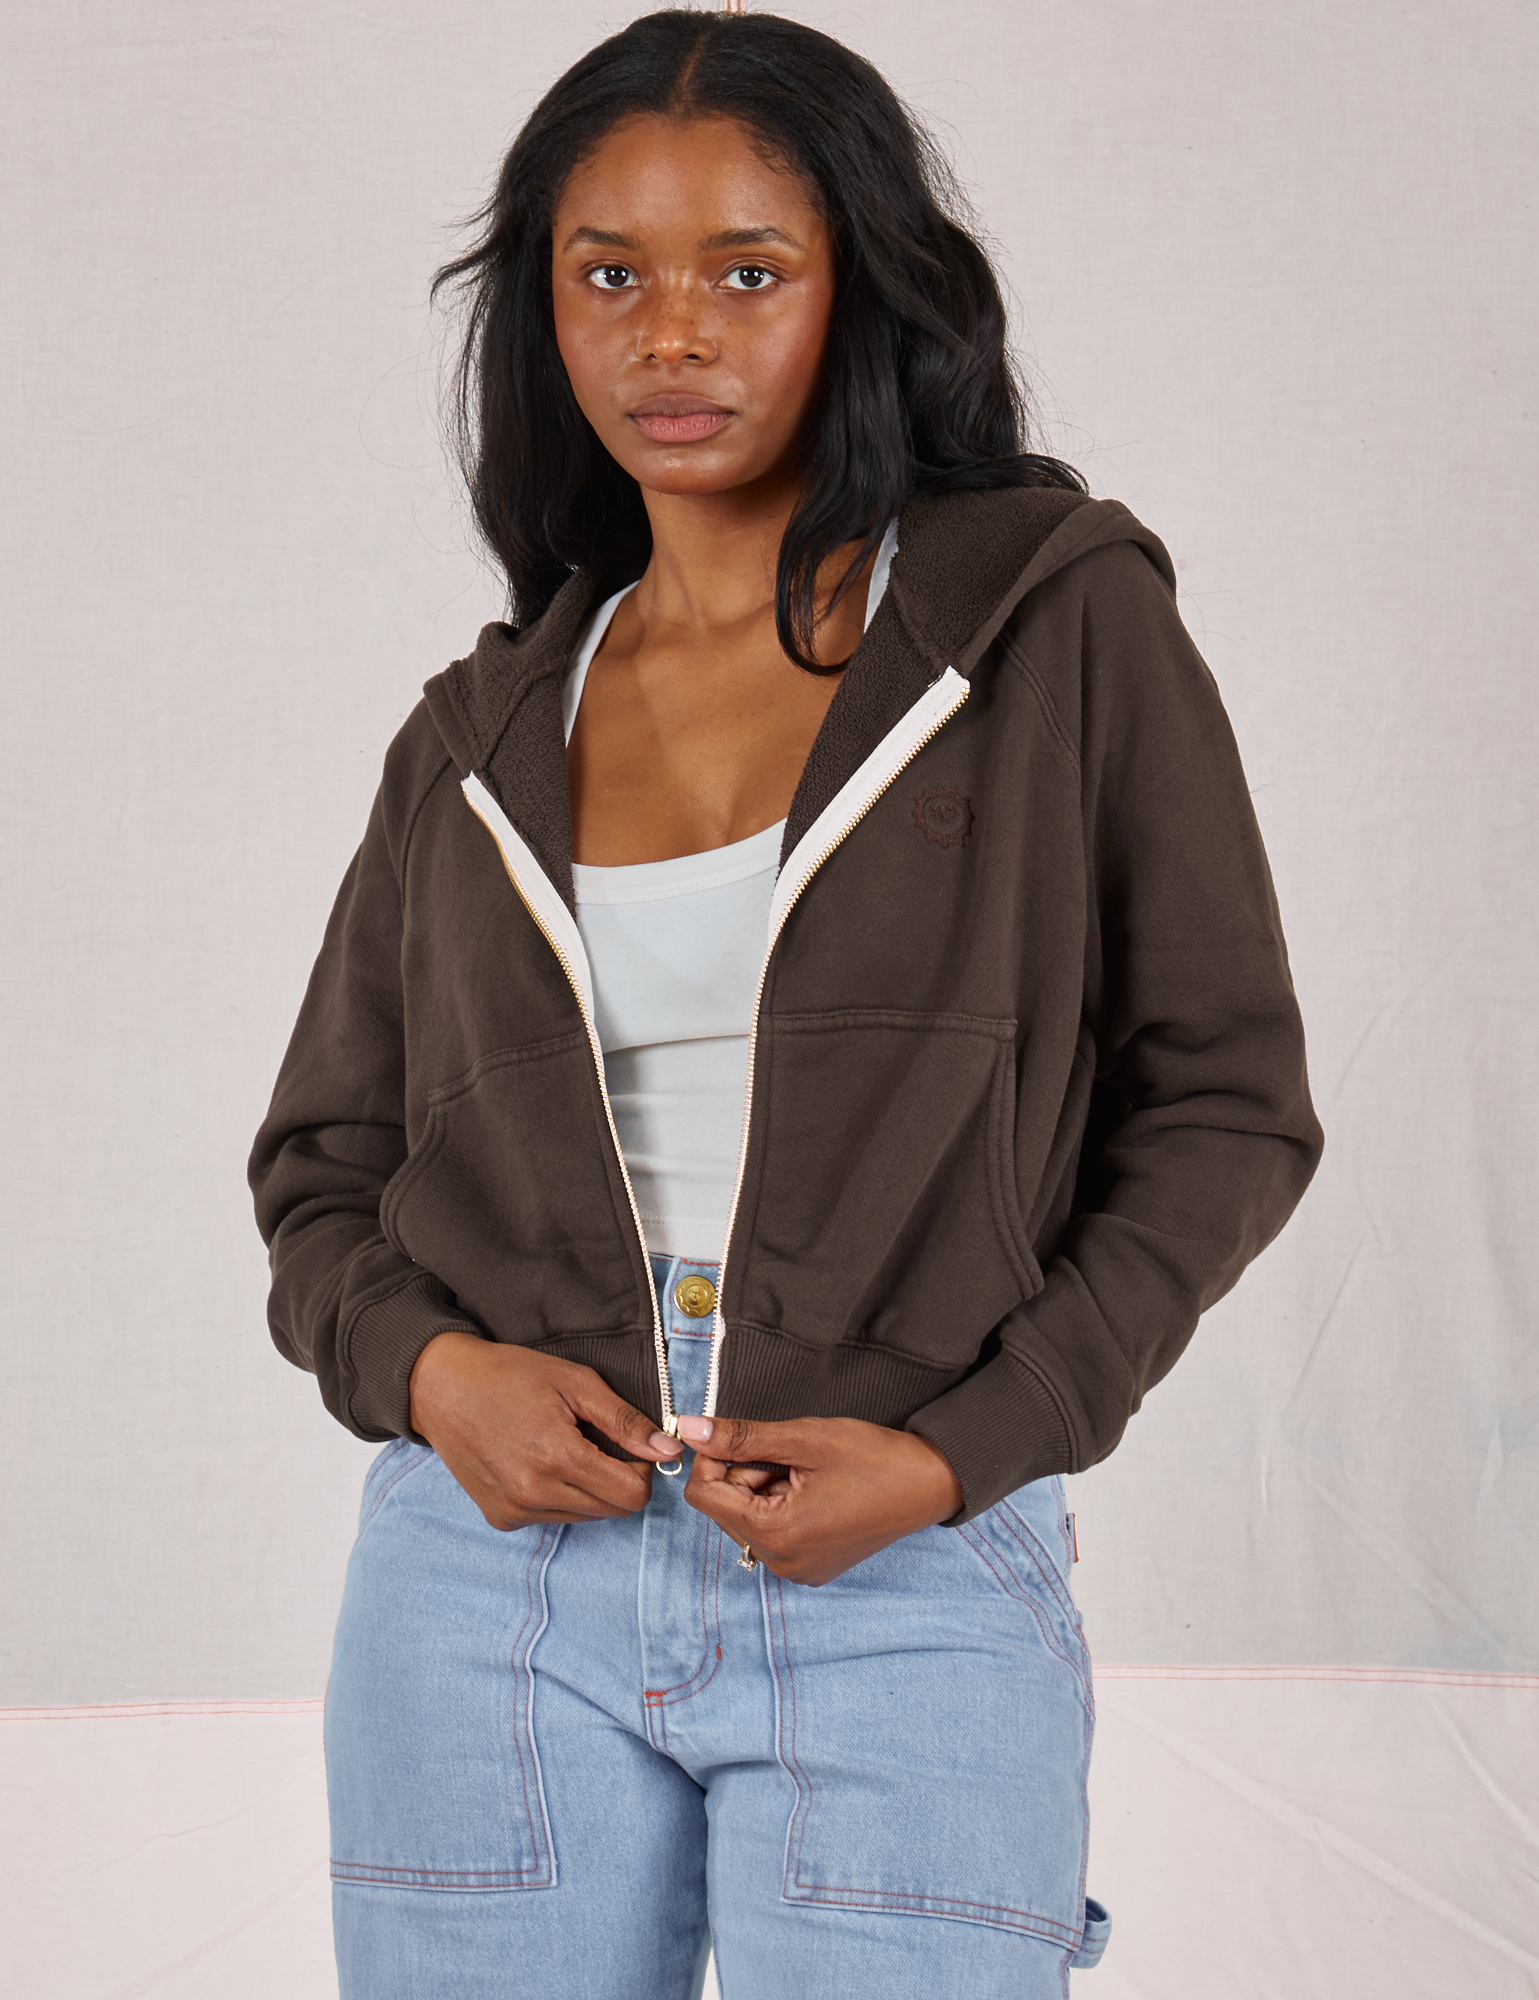 Kandia is 5&#39;3&quot; and wearing P Cropped Zip Hoodie in Espresso Brown paired with a vintage off-white Cropped Tank and light wash Carpenter Jeans